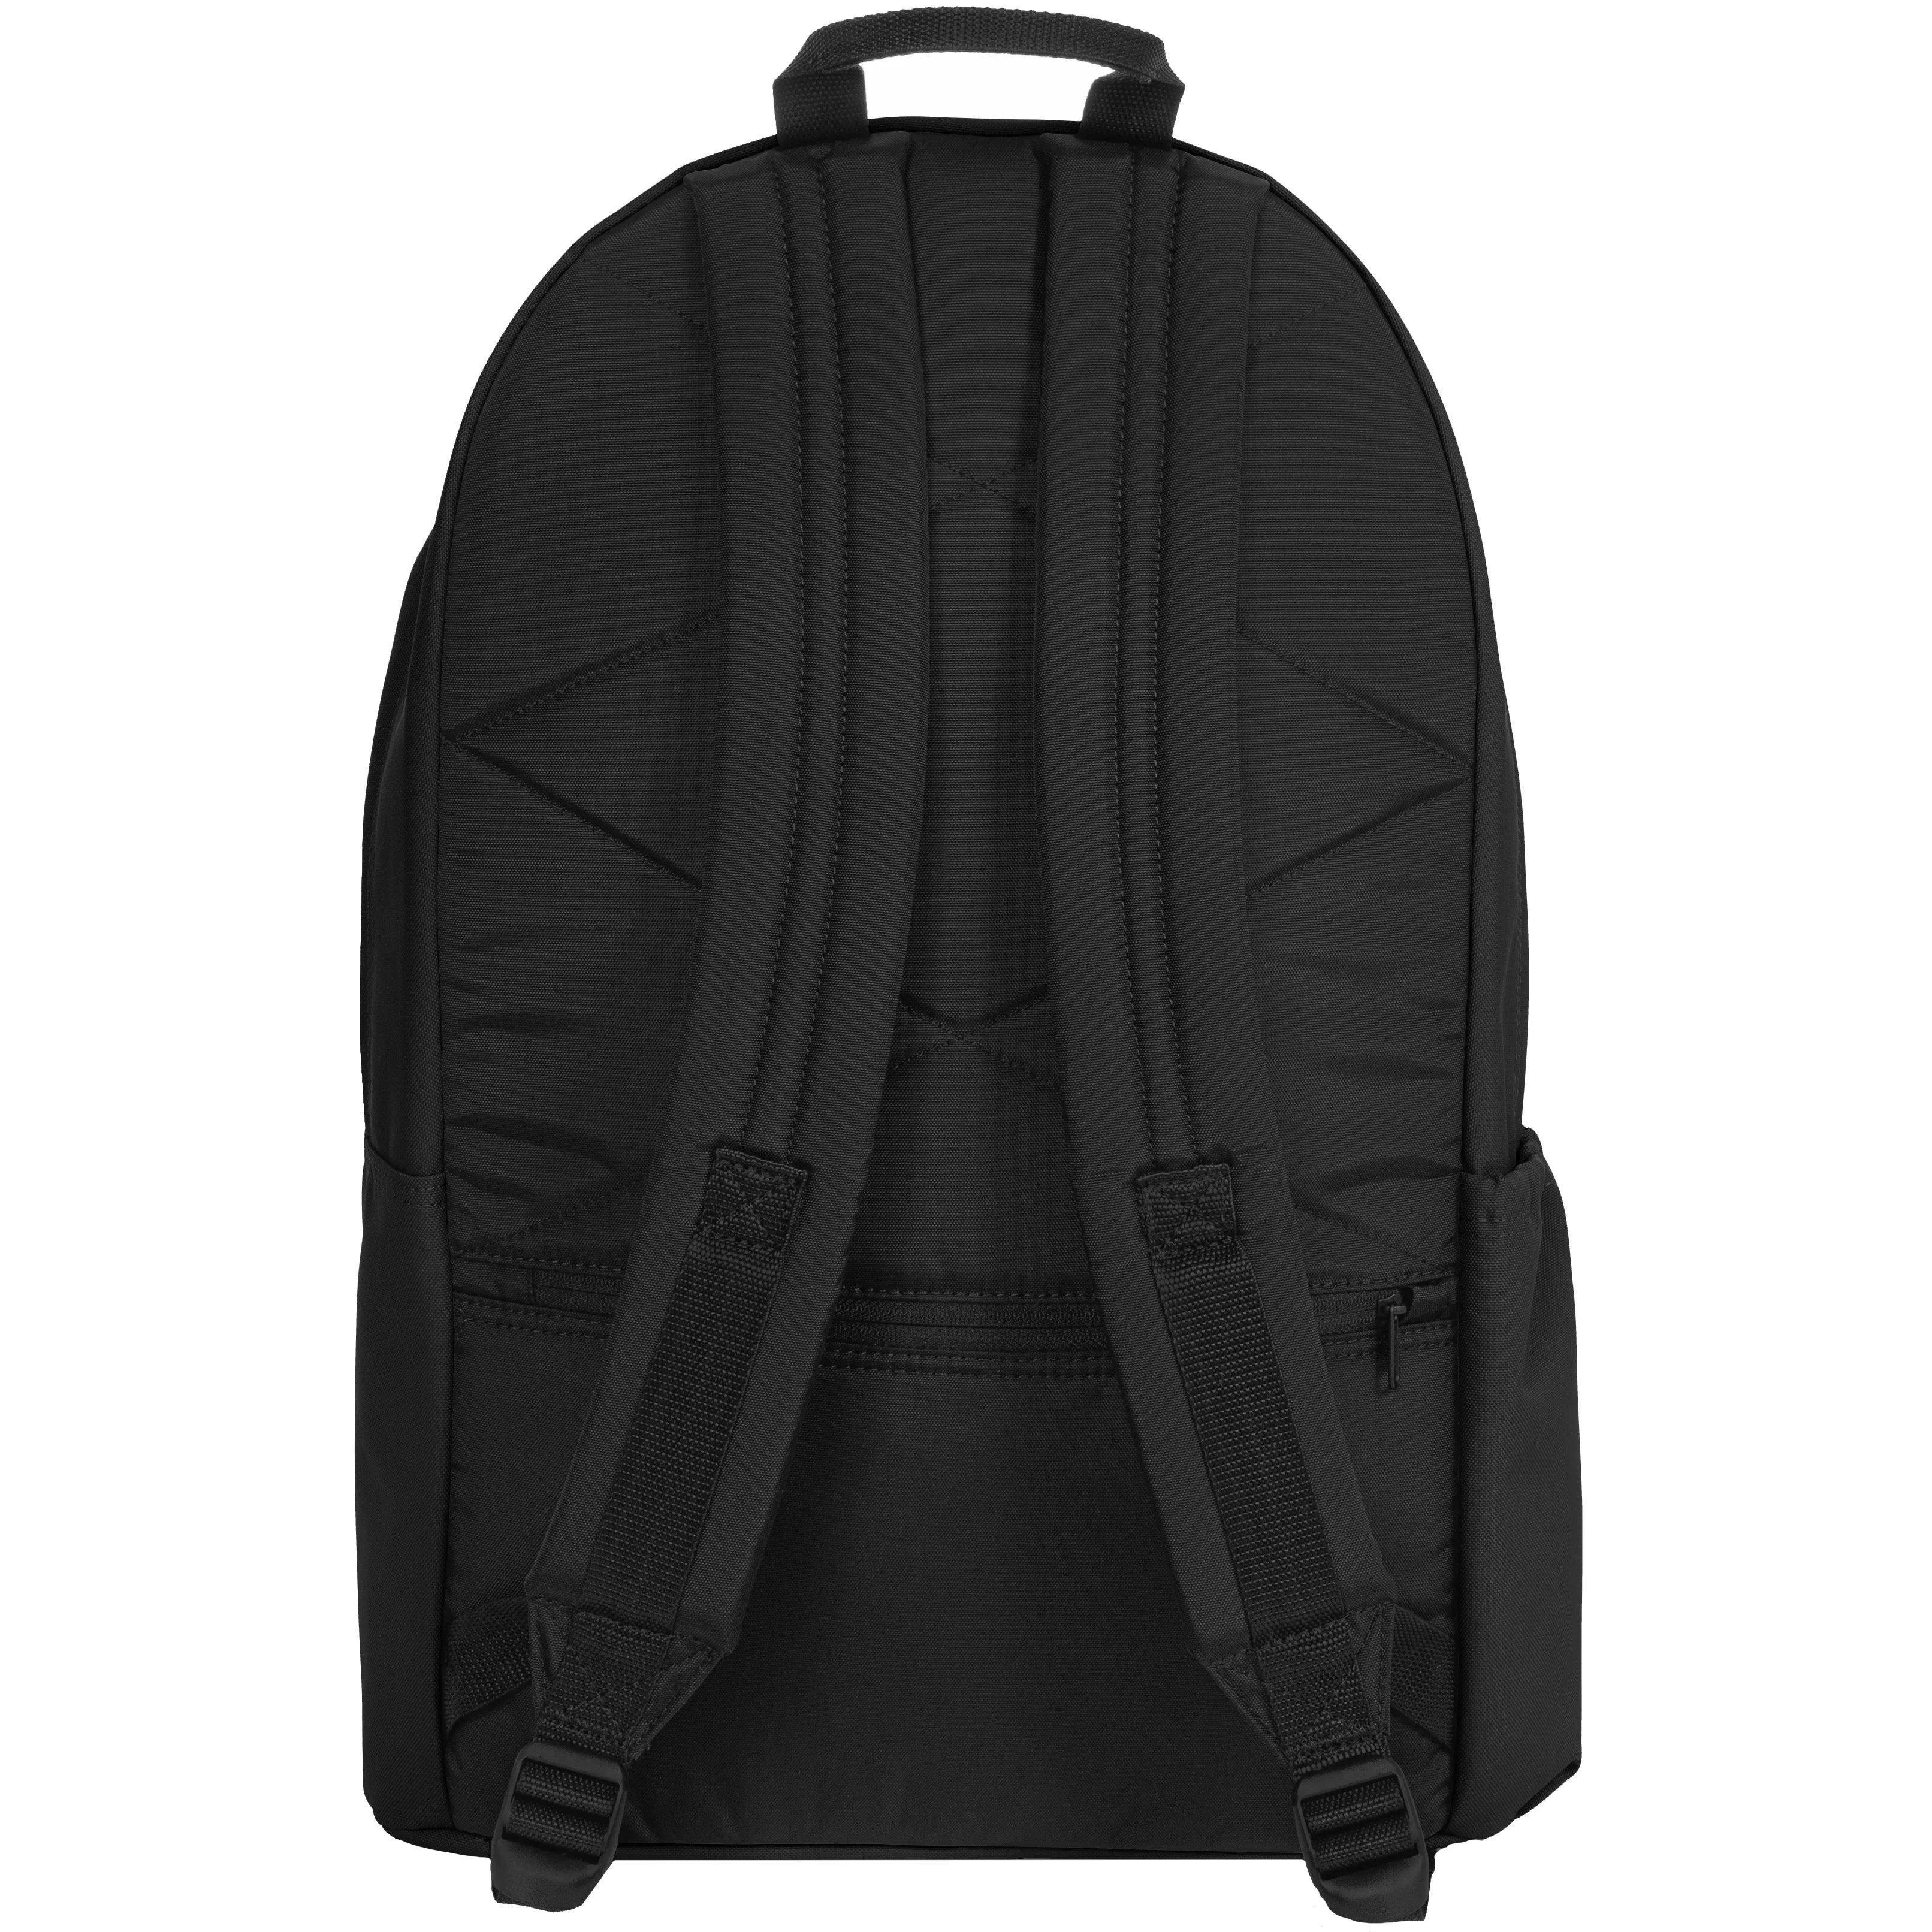 Eastpak Authentic Padded Double Backpack 47 cm - Cloud Navy